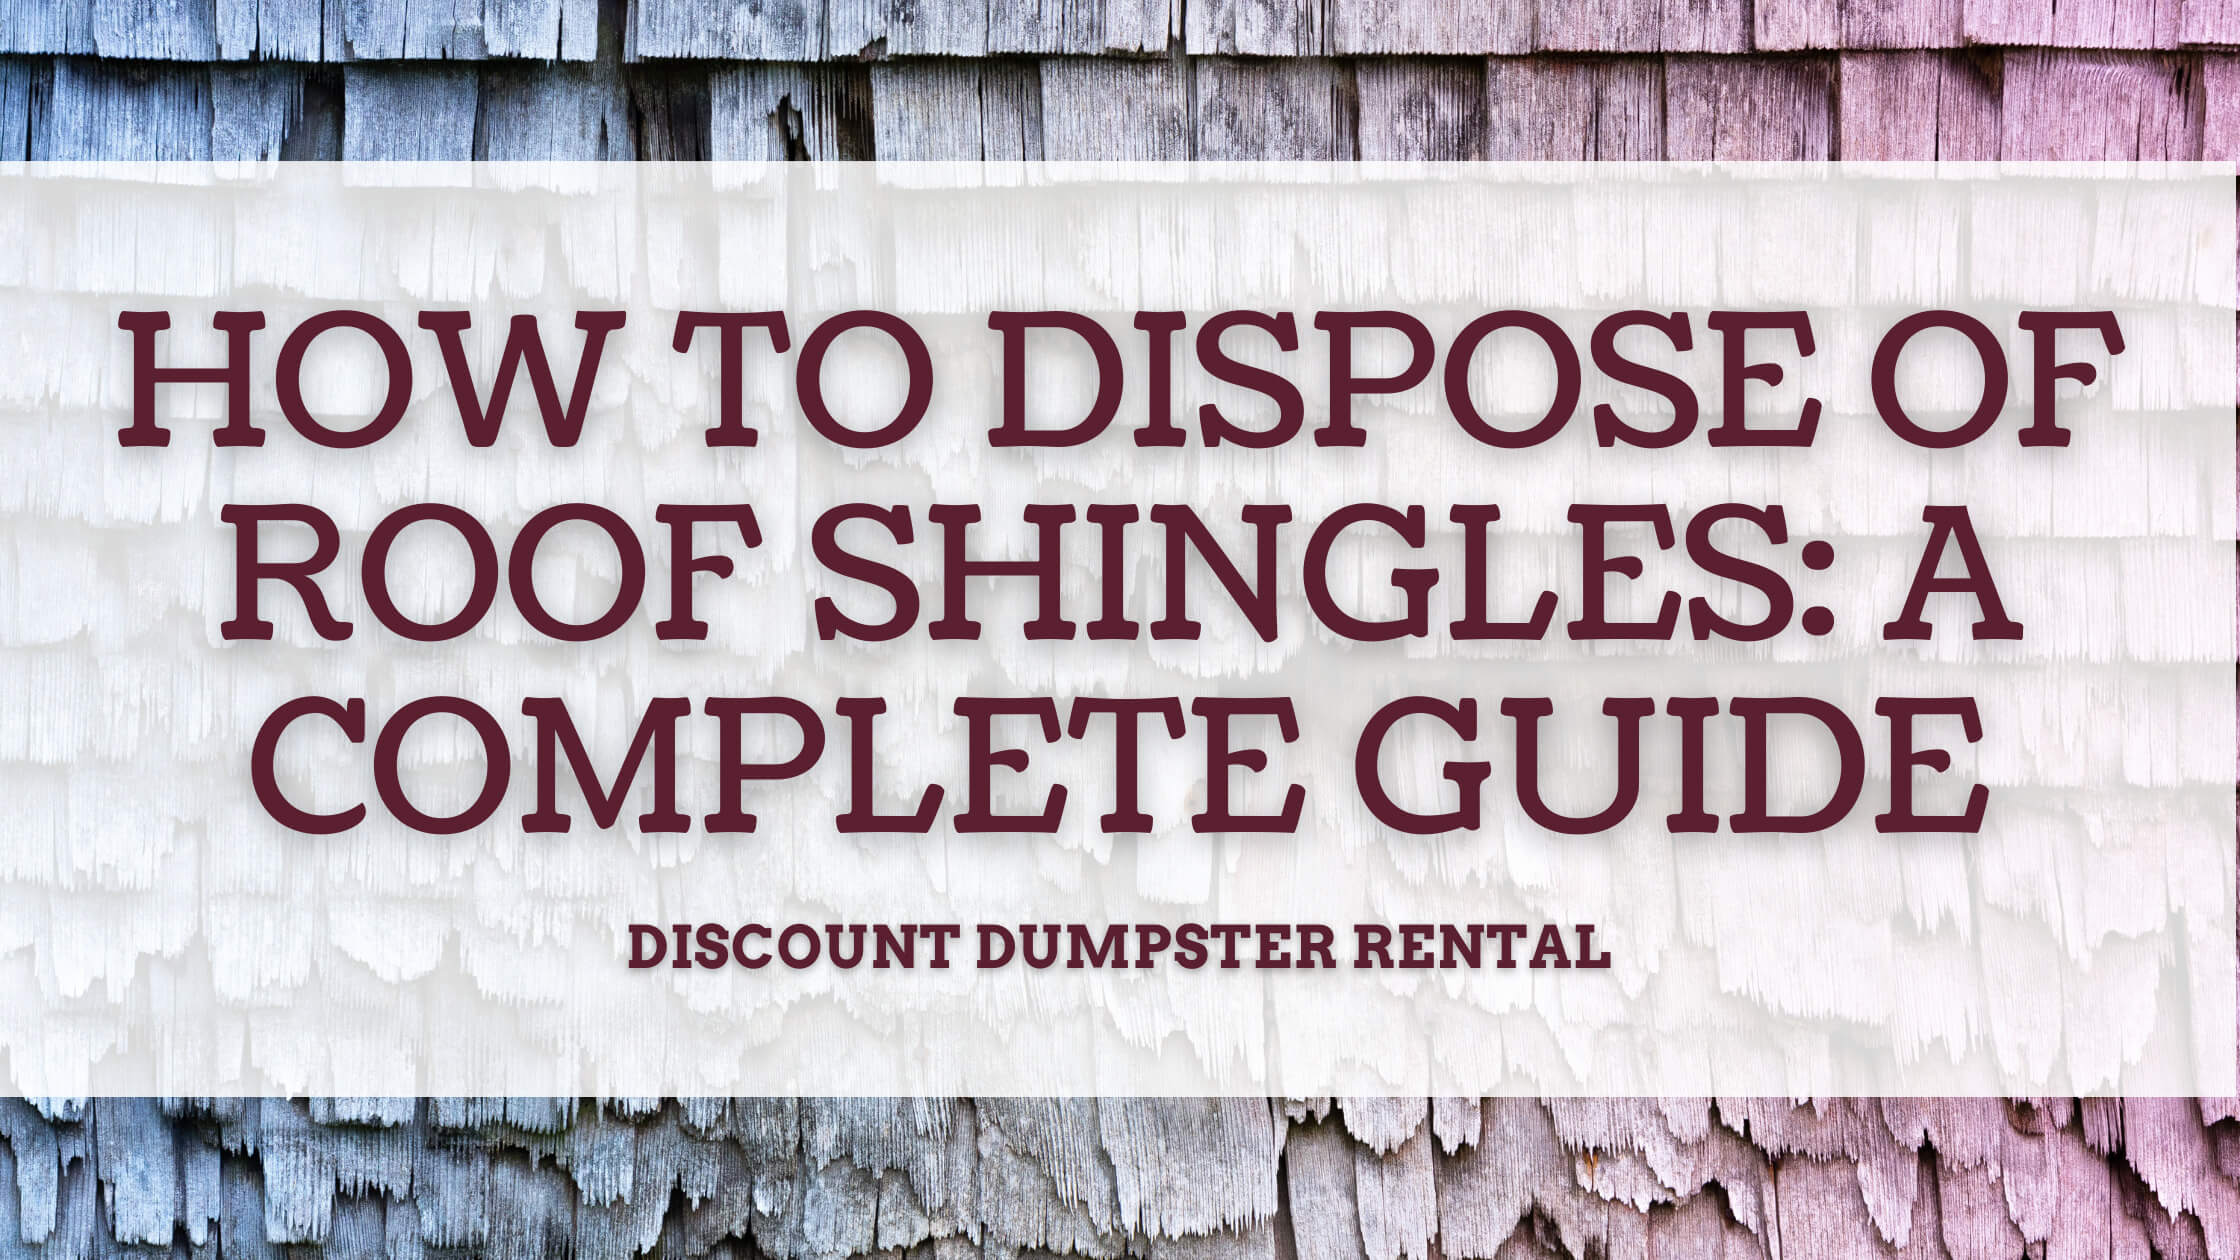 https://discountdumpsterco.com/wp-content/uploads/How-to-Dispose-of-Roof-Shingles-A-Complete-Guide-1.jpg